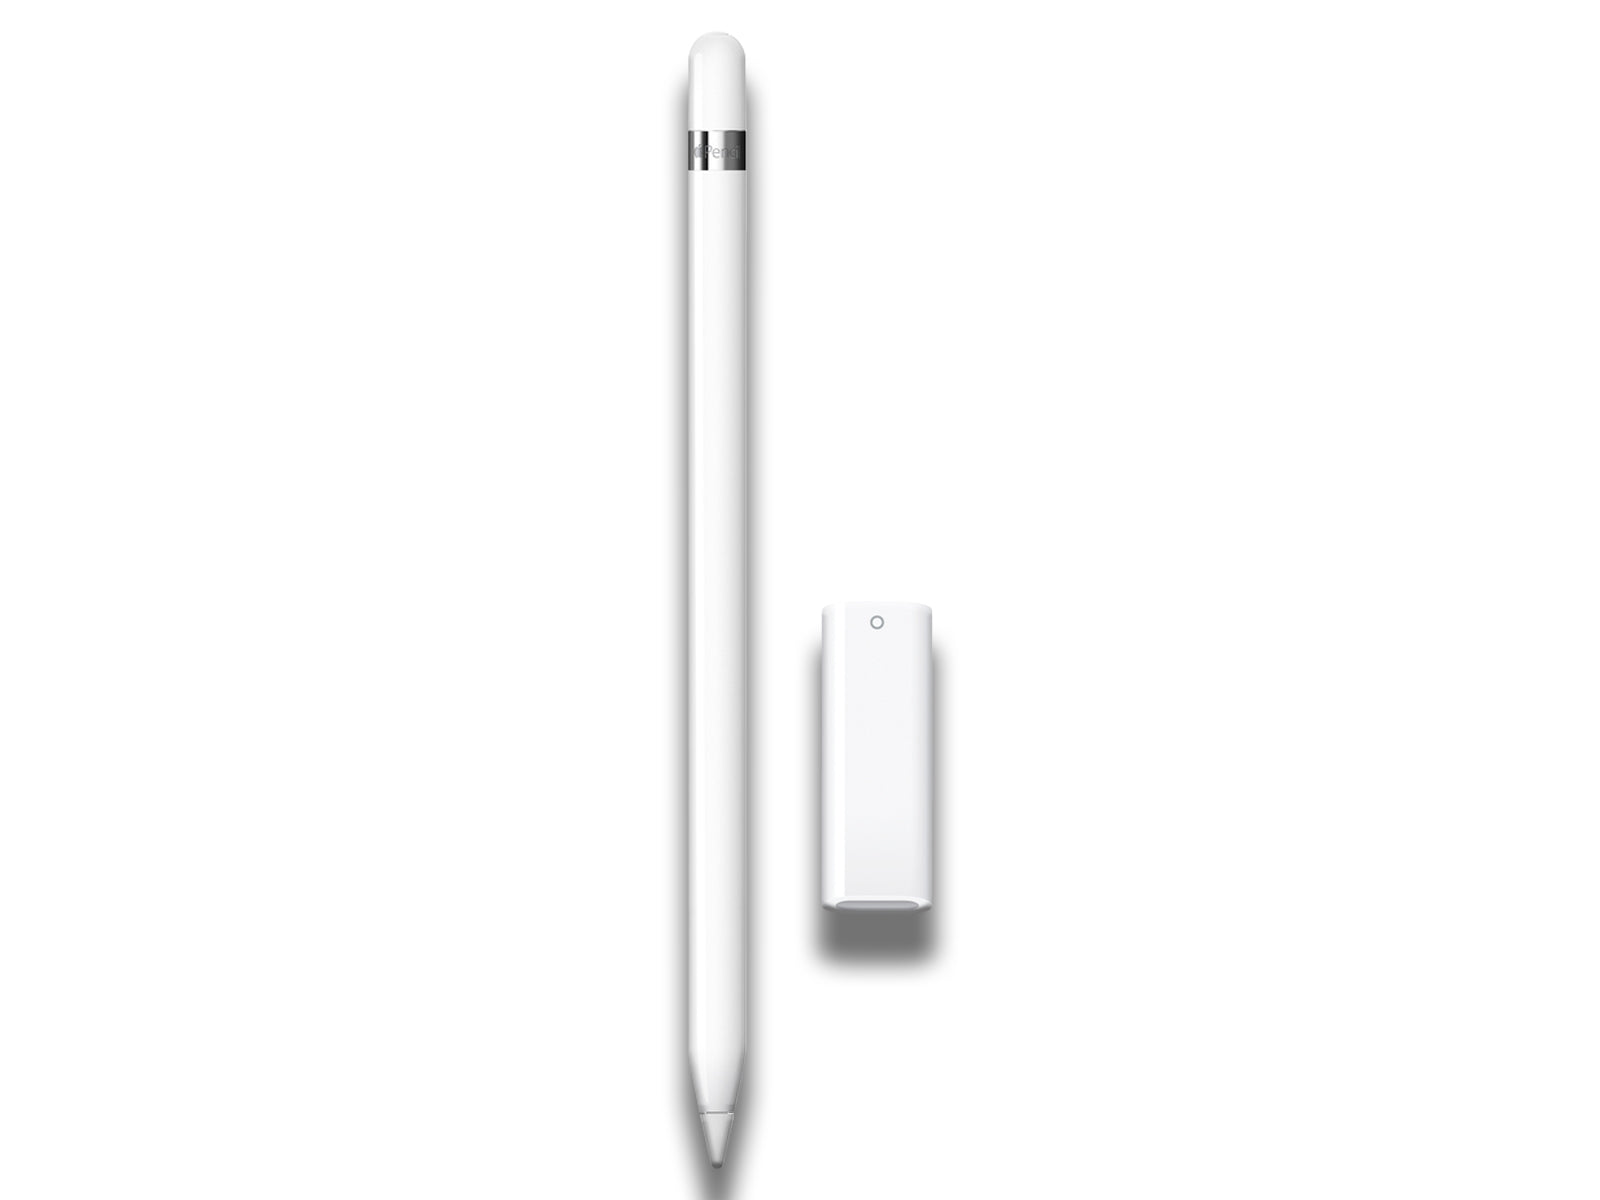 Apple Pencil first generation with adapter